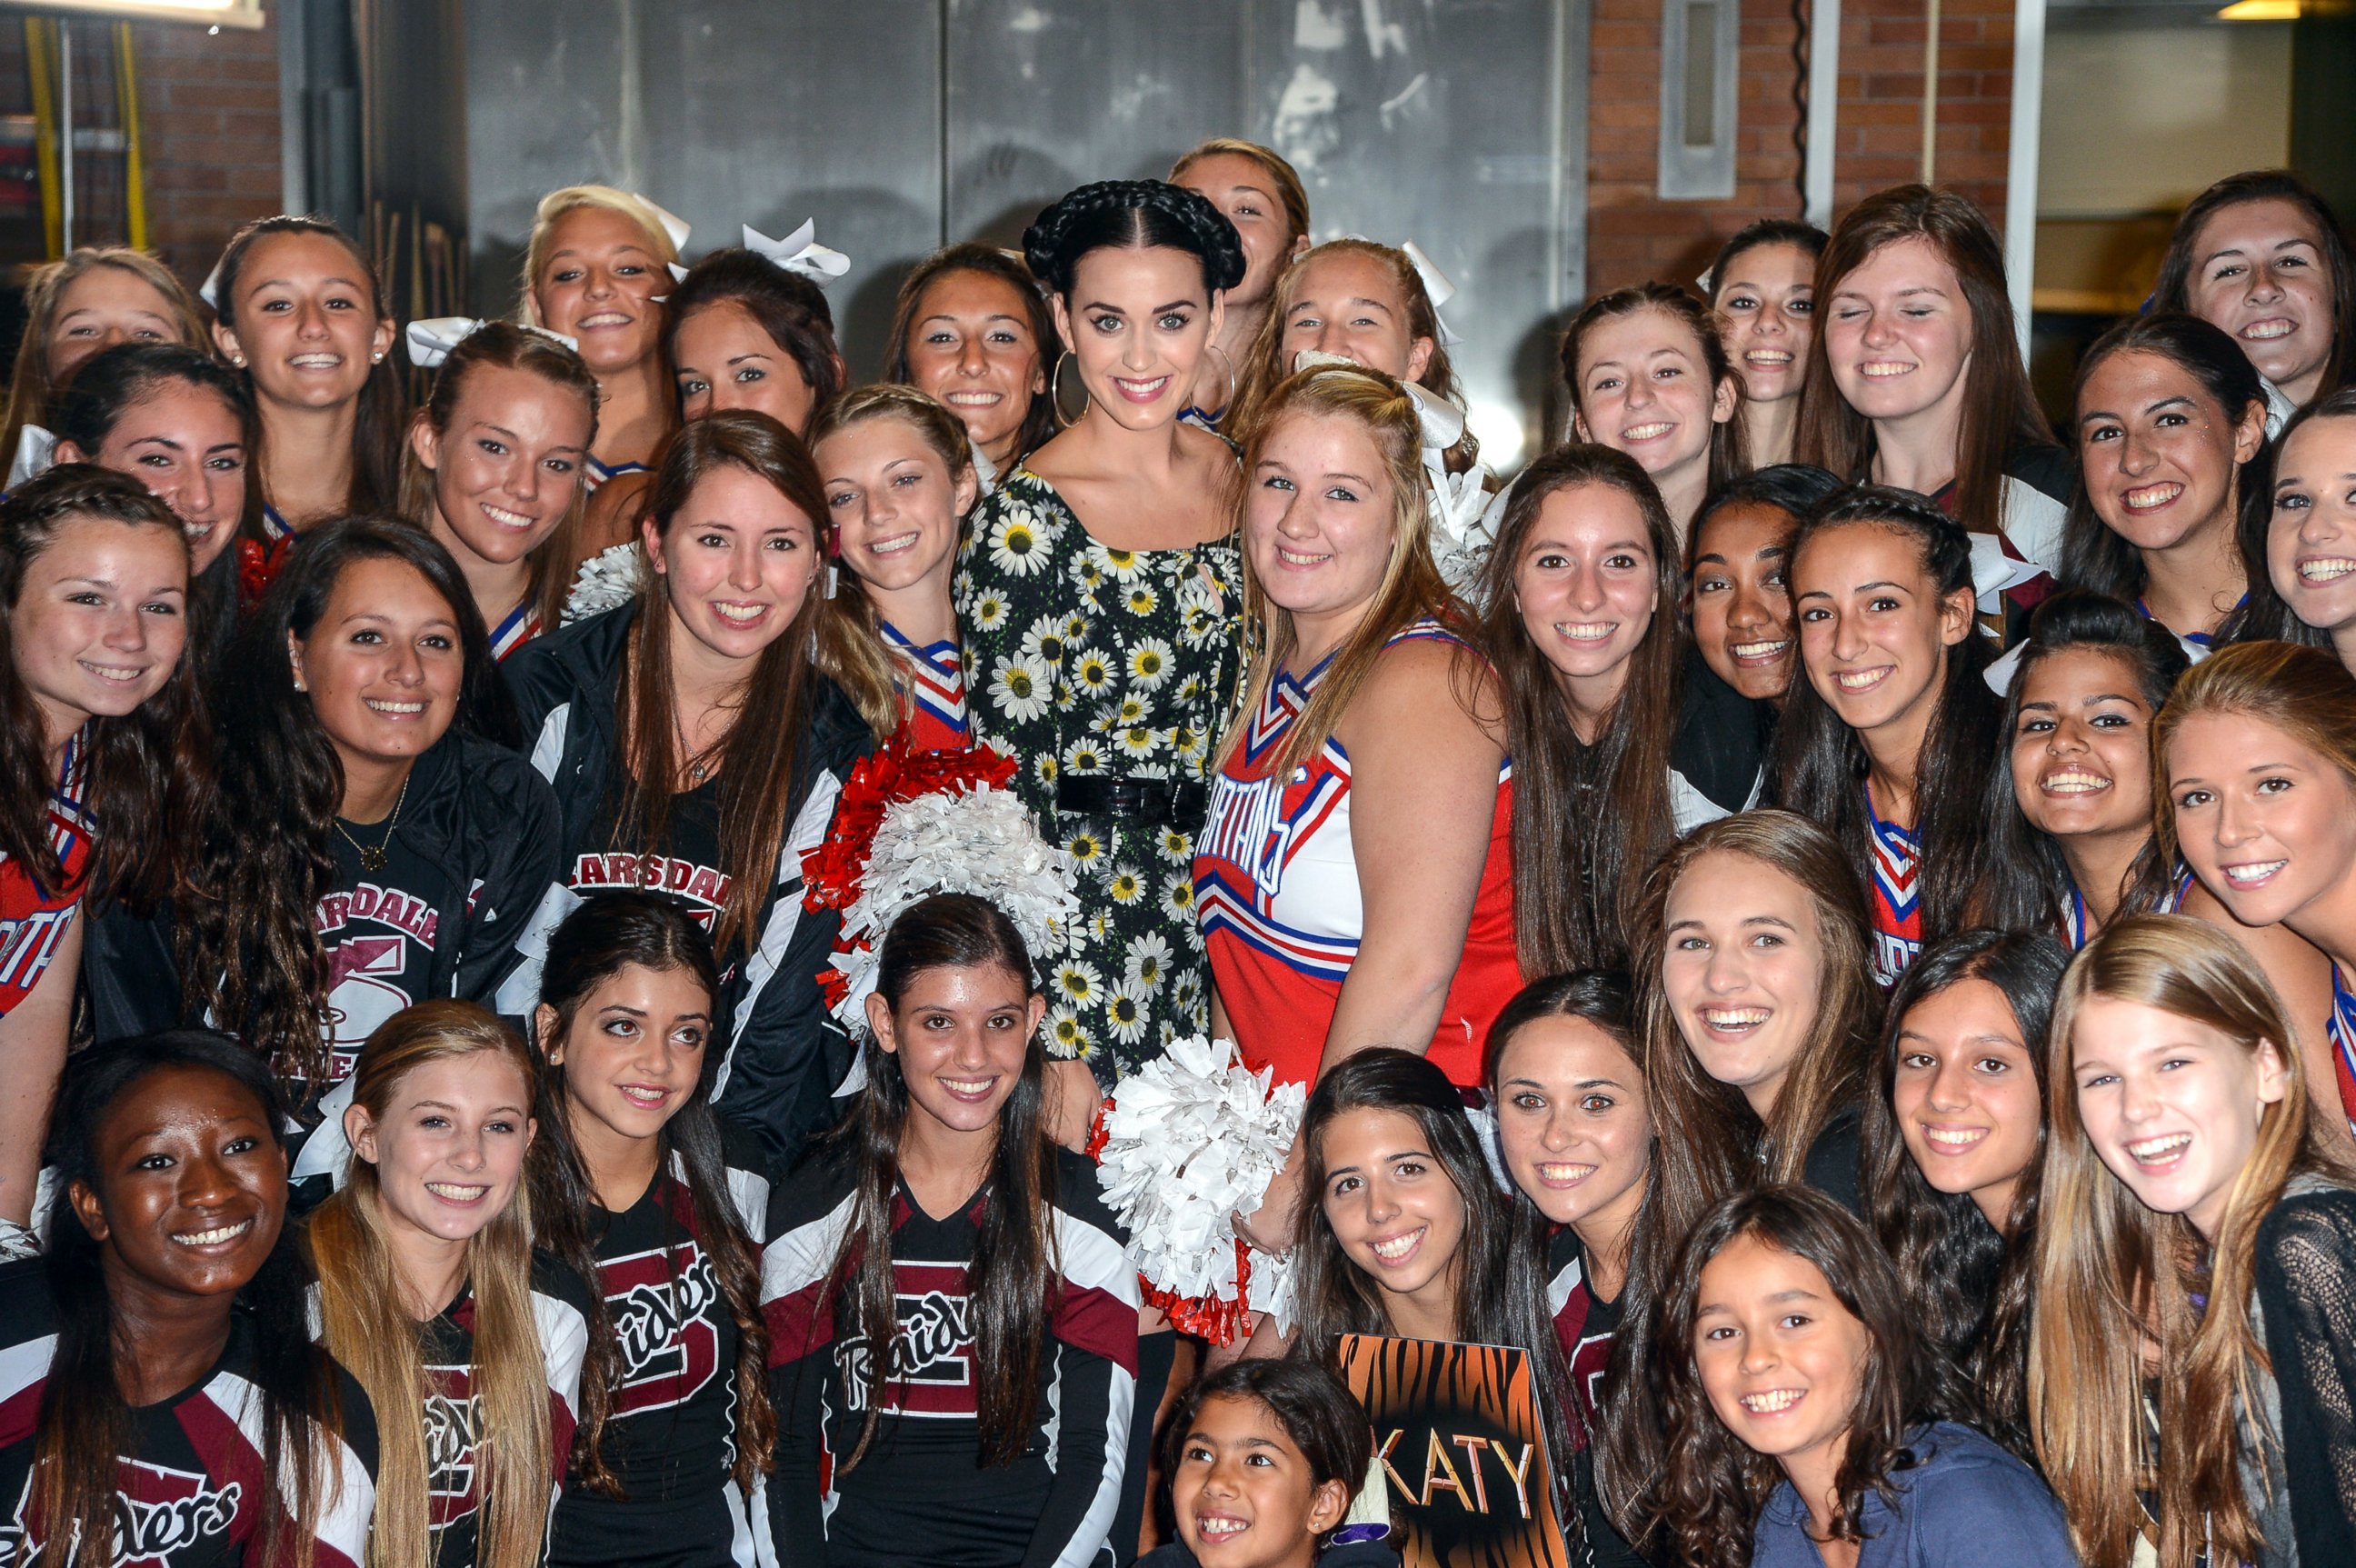 PHOTO: Katy Perry, center, poses for photos with her fans at the "Good Morning America" taping at the ABC Times Square Studios, Sept. 6, 2013, in New York.